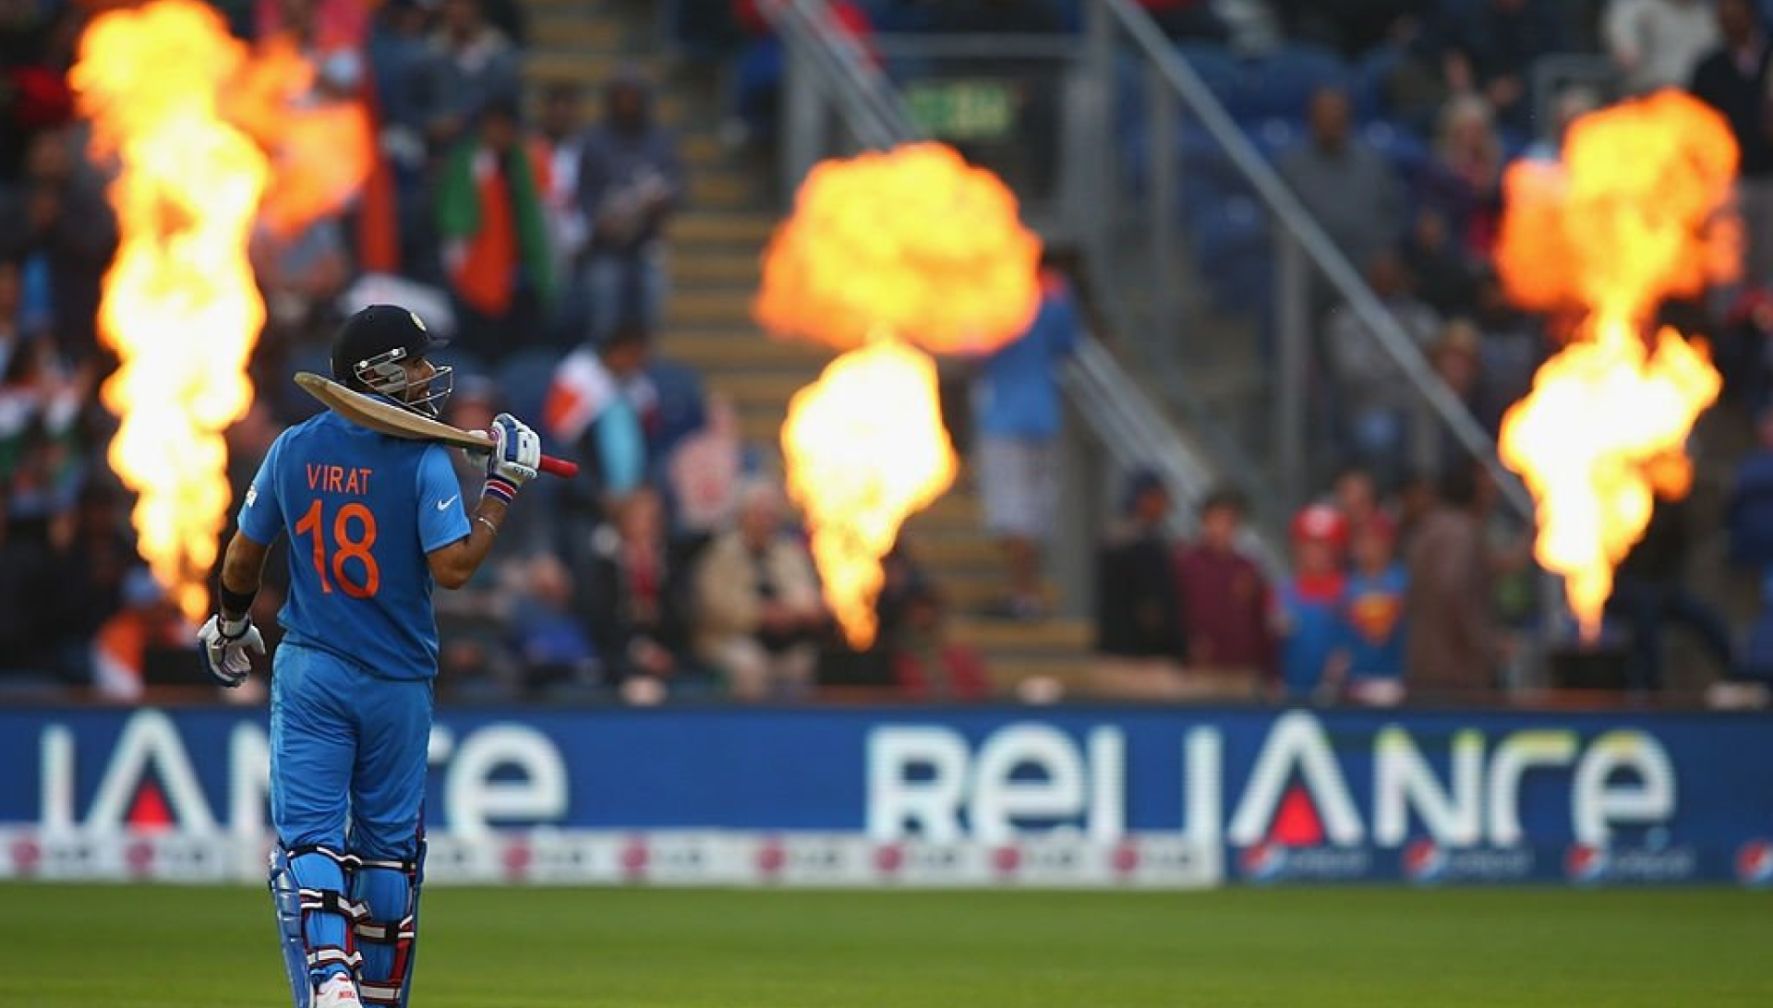 Virat Kohli relinquishes opening position, to bat at number three throughout World T20 2021